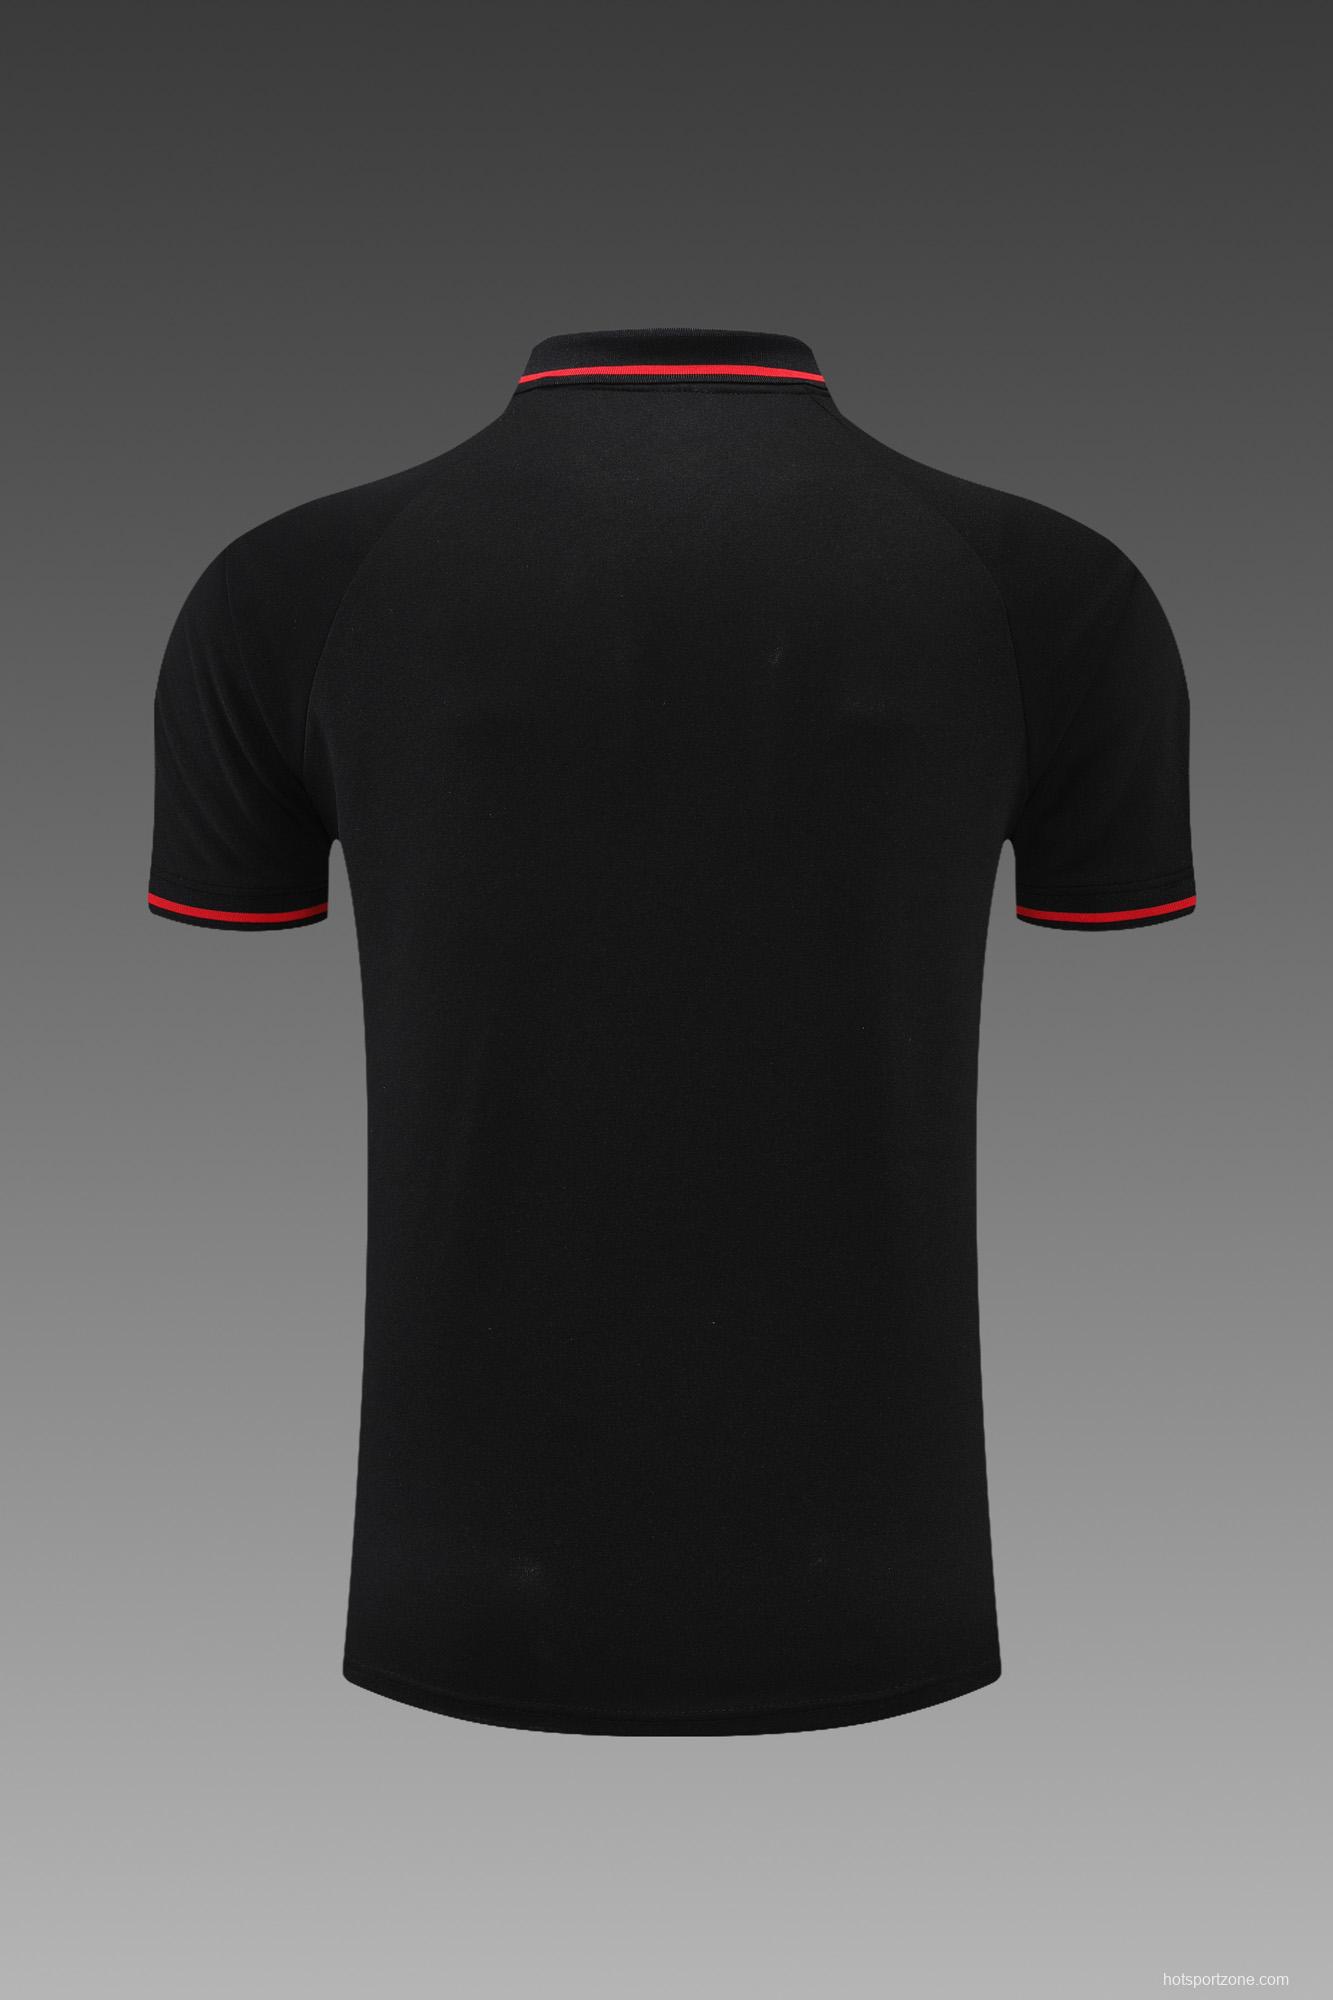 AFC Ajax POLO kit Black (not supported to be sold separately)